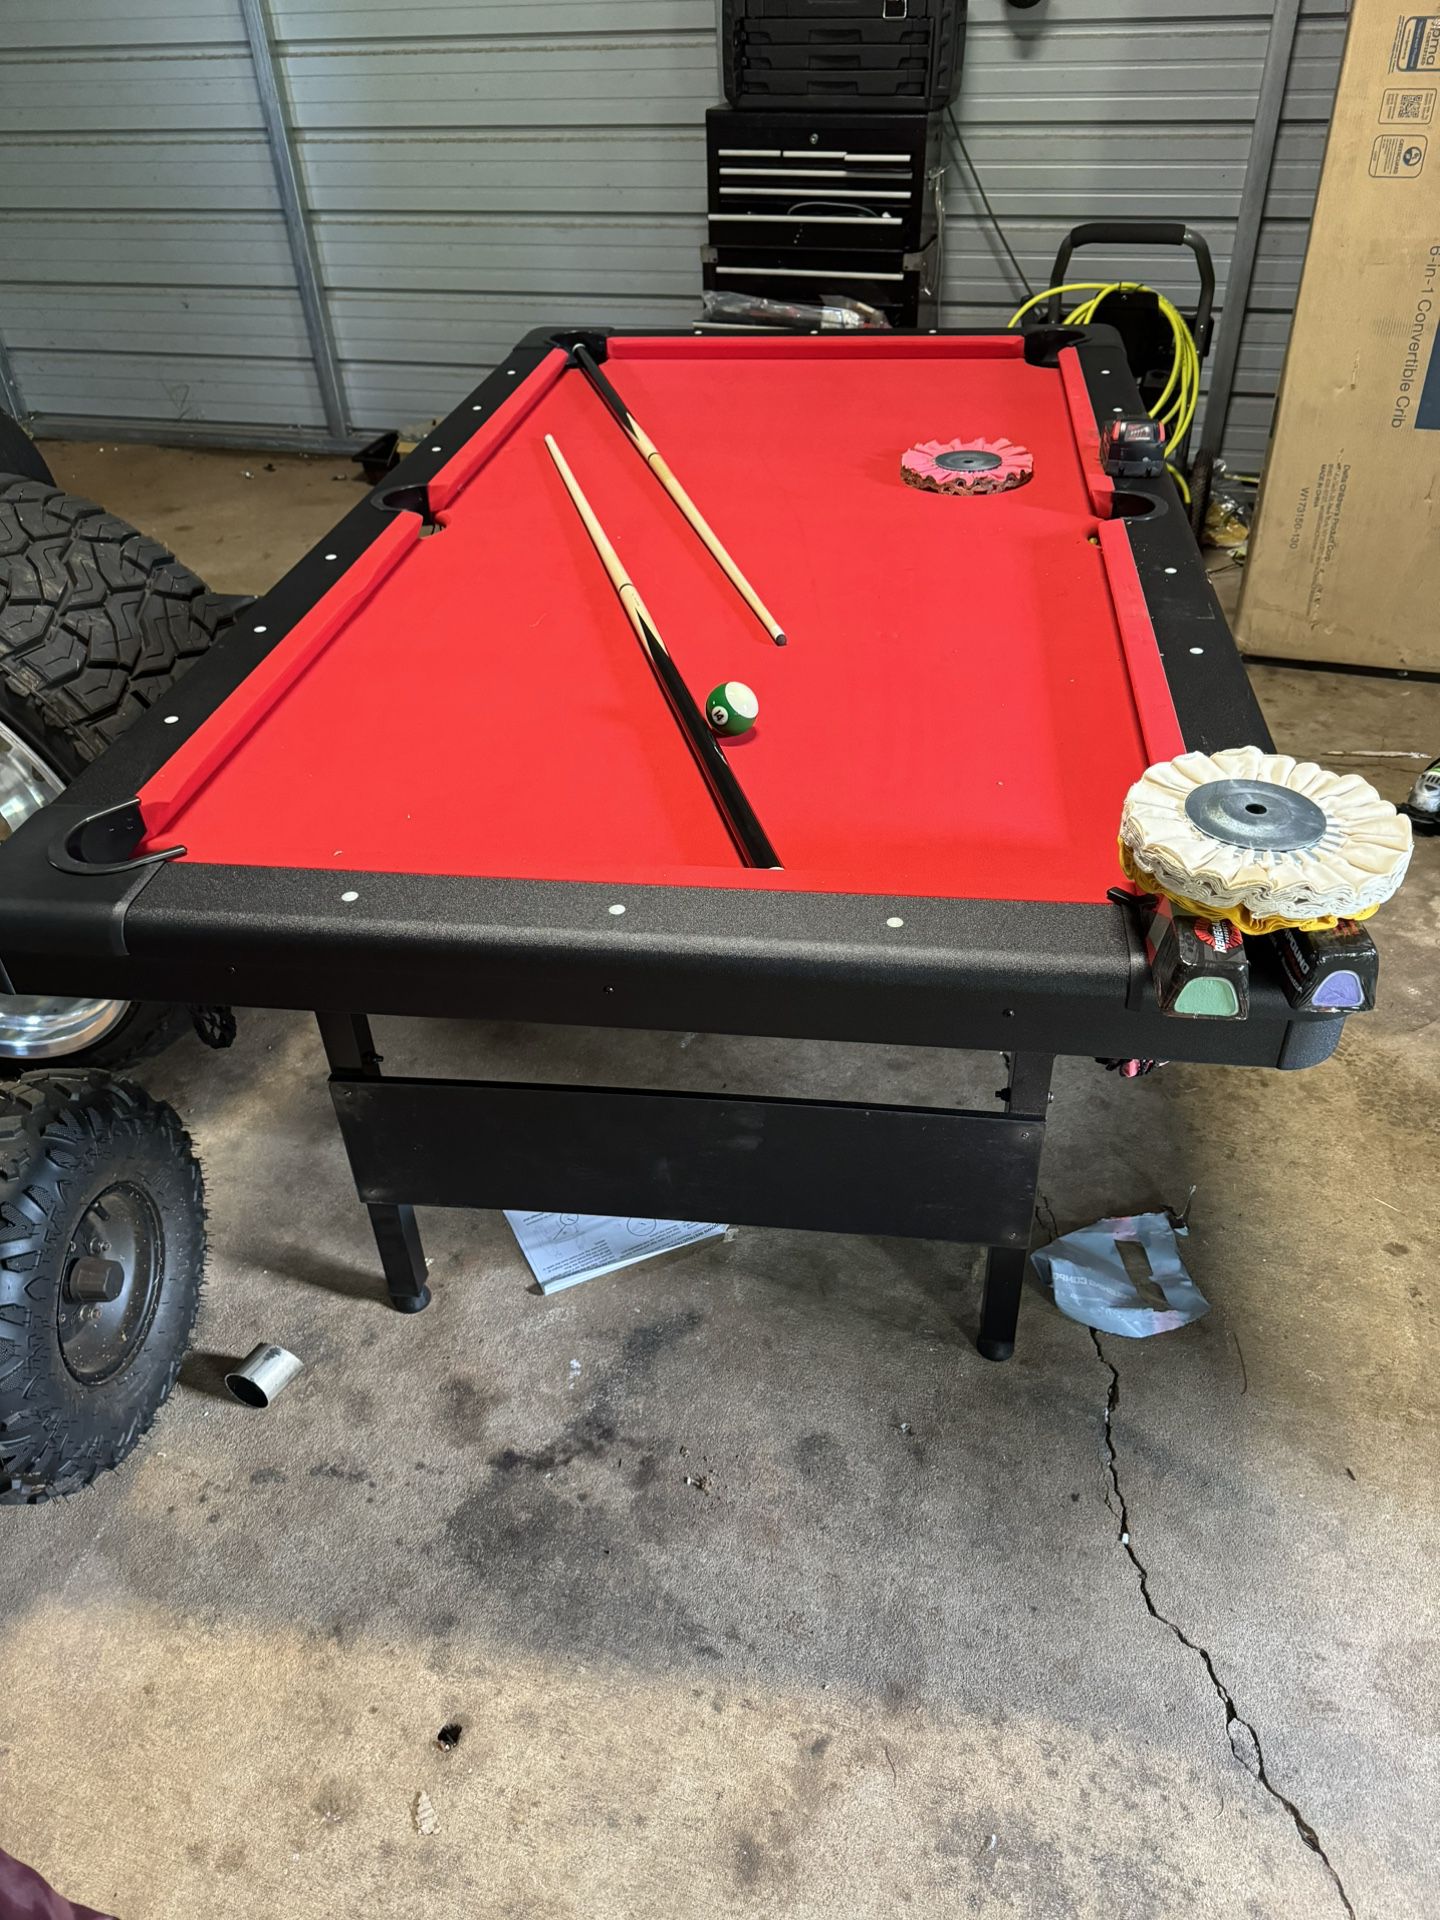 Go Sports 7ft Pool Table